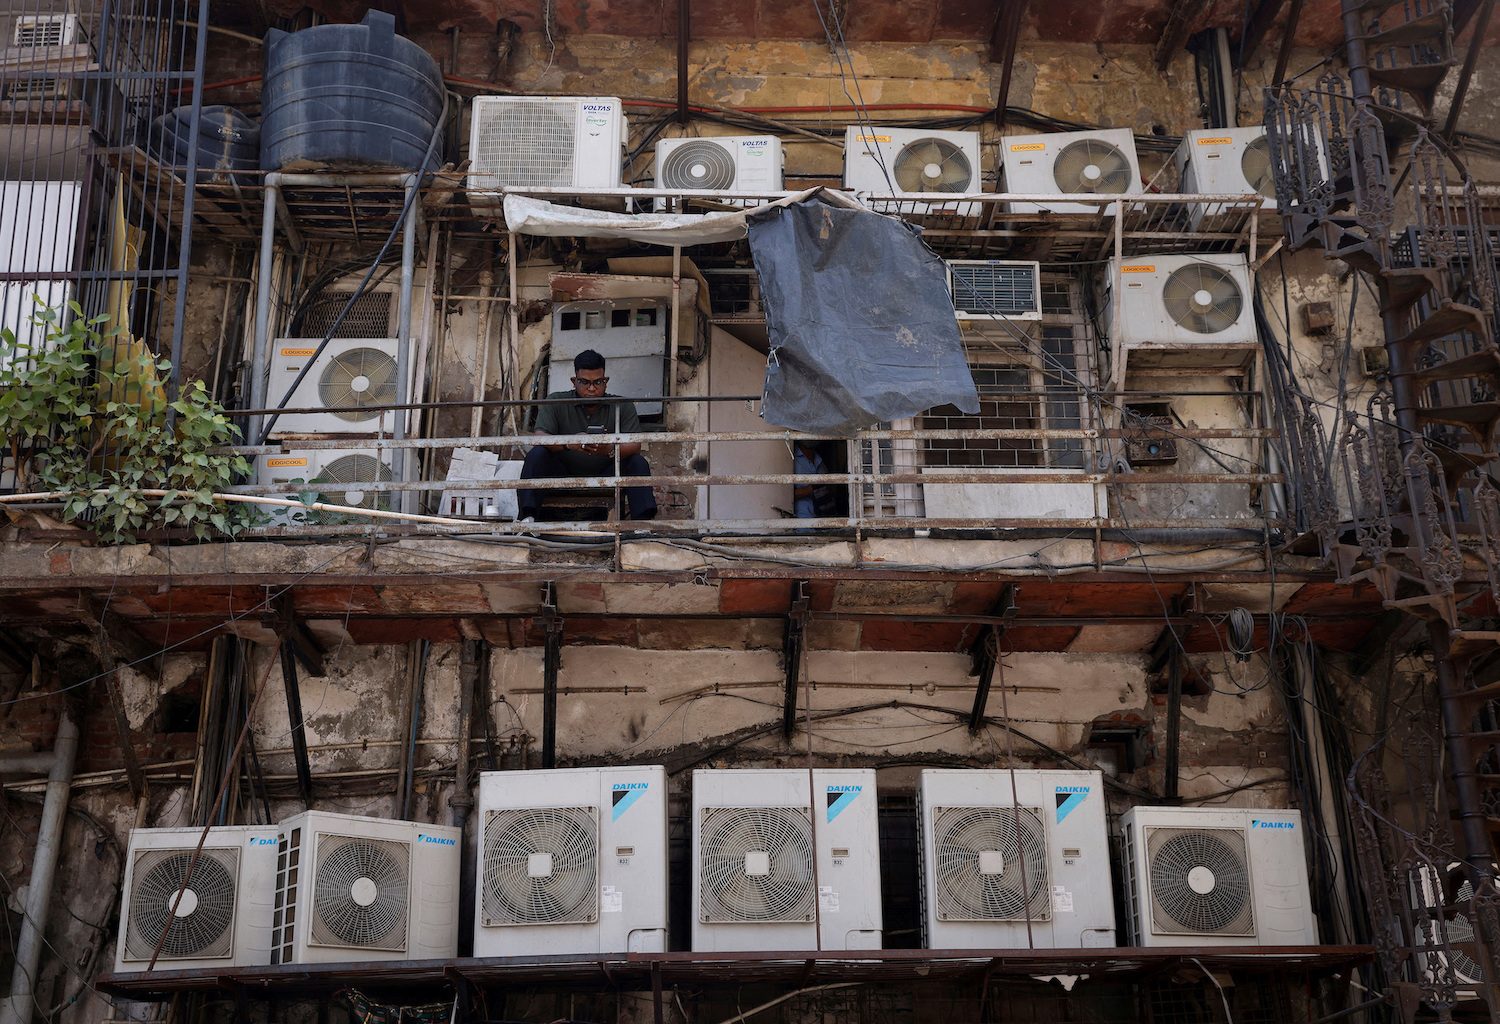 Air-conditioning companies plan cool designs for warming world, but high costs a hurdle